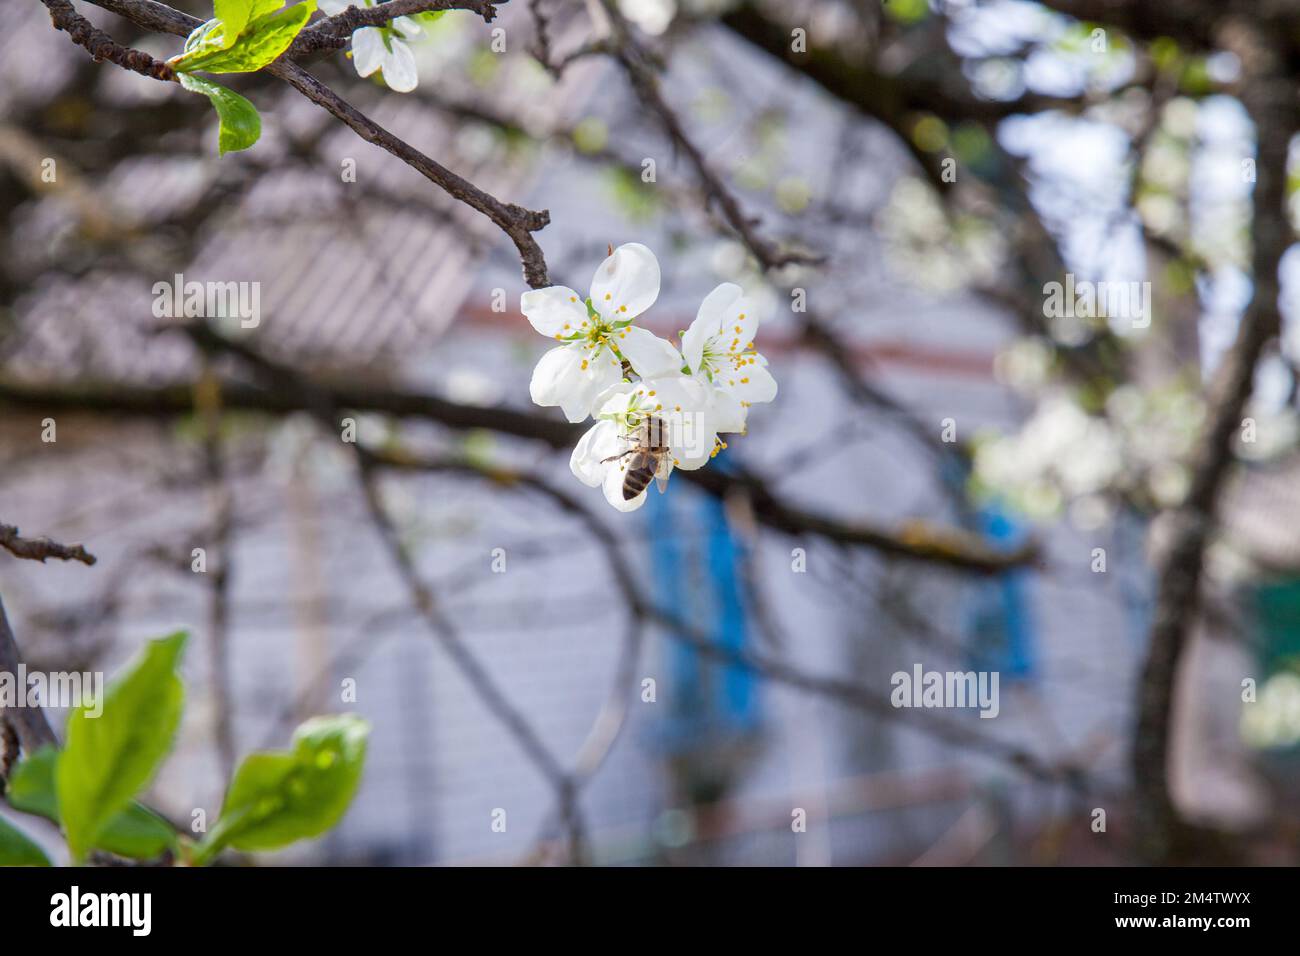 Orchard at spring time. Close up view of honeybee on white flower of apple tree collecting pollen and nectar to make sweet honey. Small green leaves a Stock Photo